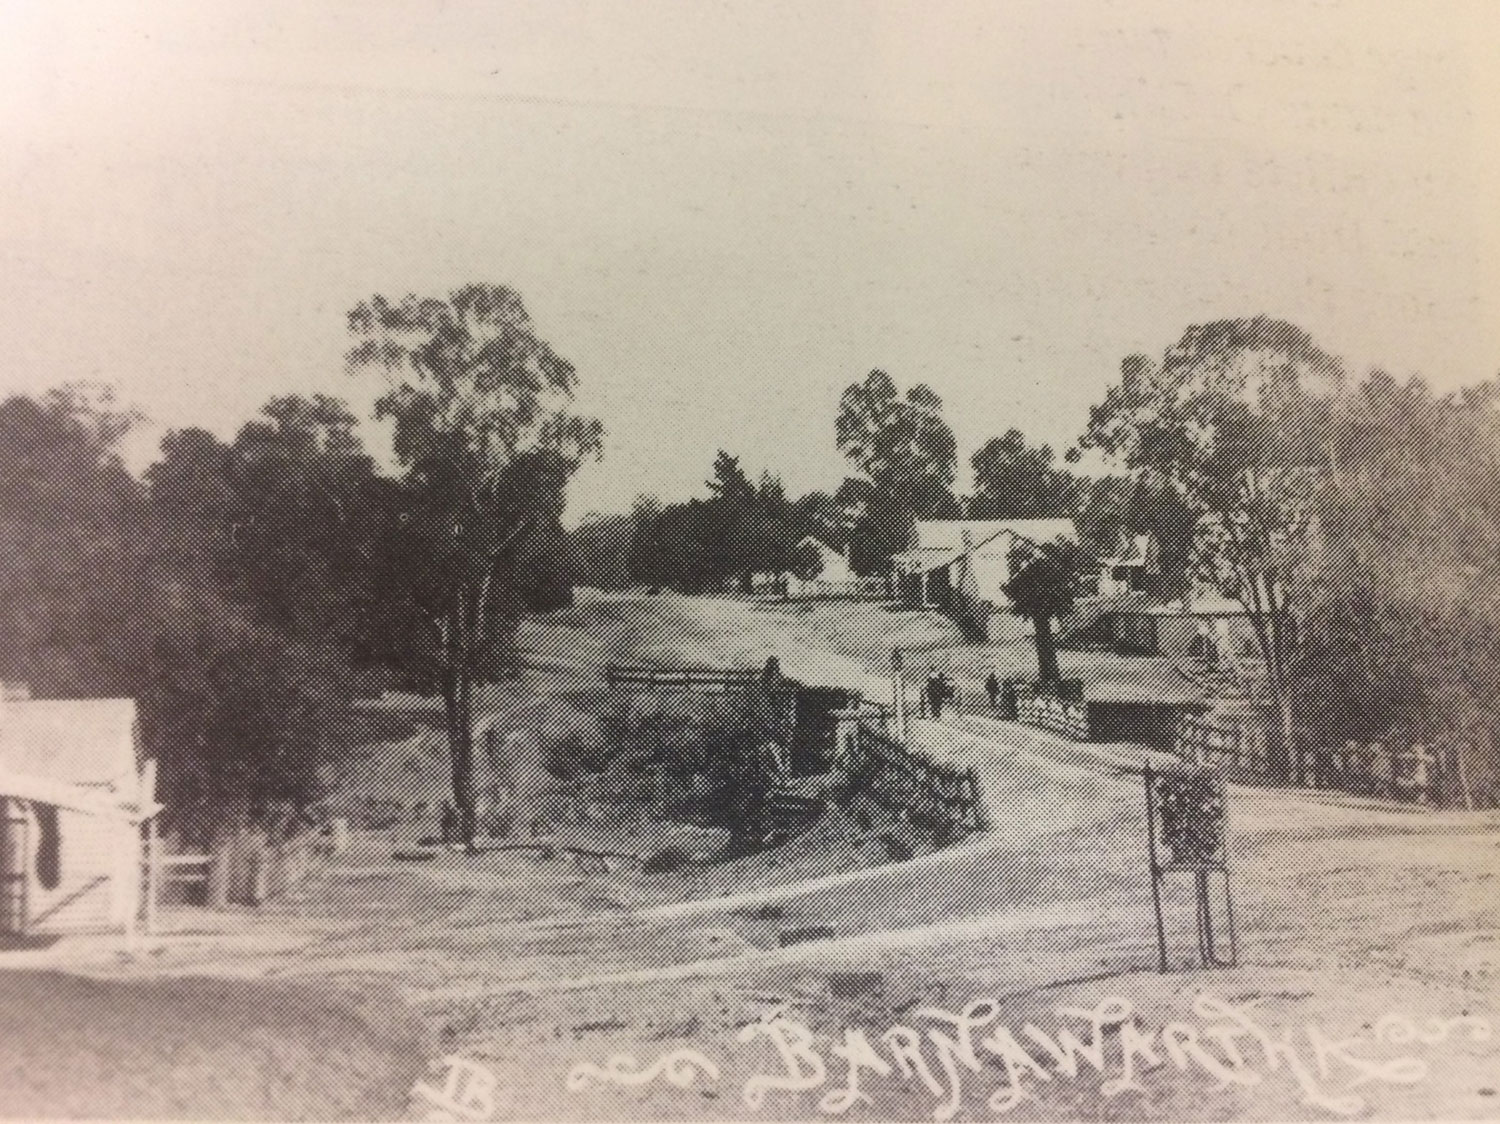 Barnawartha High Street, looking west. Early image, date unknown